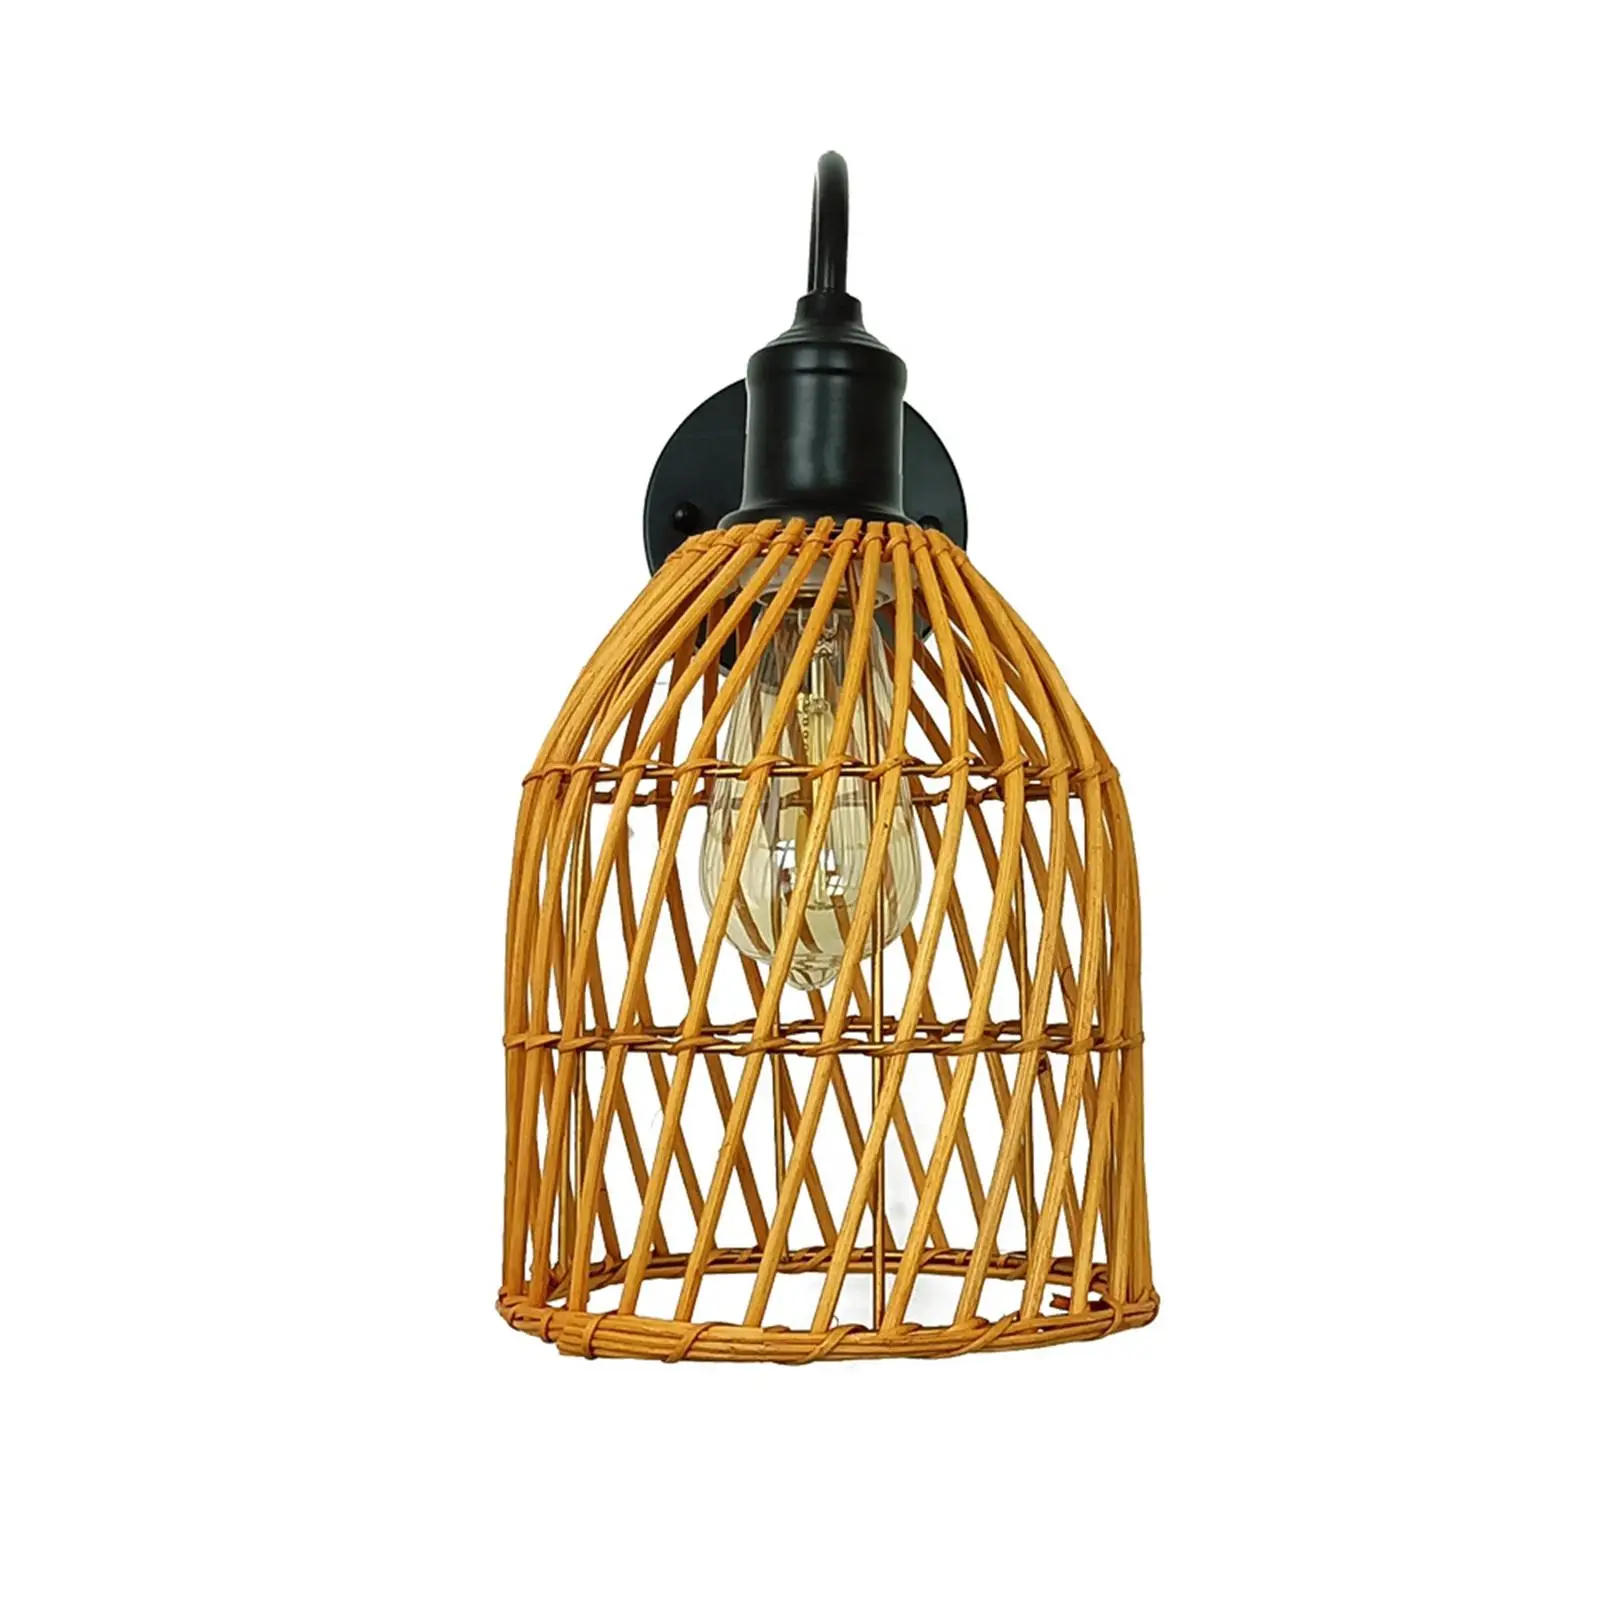 Wall Lamp Rattan Decoration Japanese Style Fixture Modern Interior for Bedroom Living Room Farmhouse EU Plug Not Included Bulb